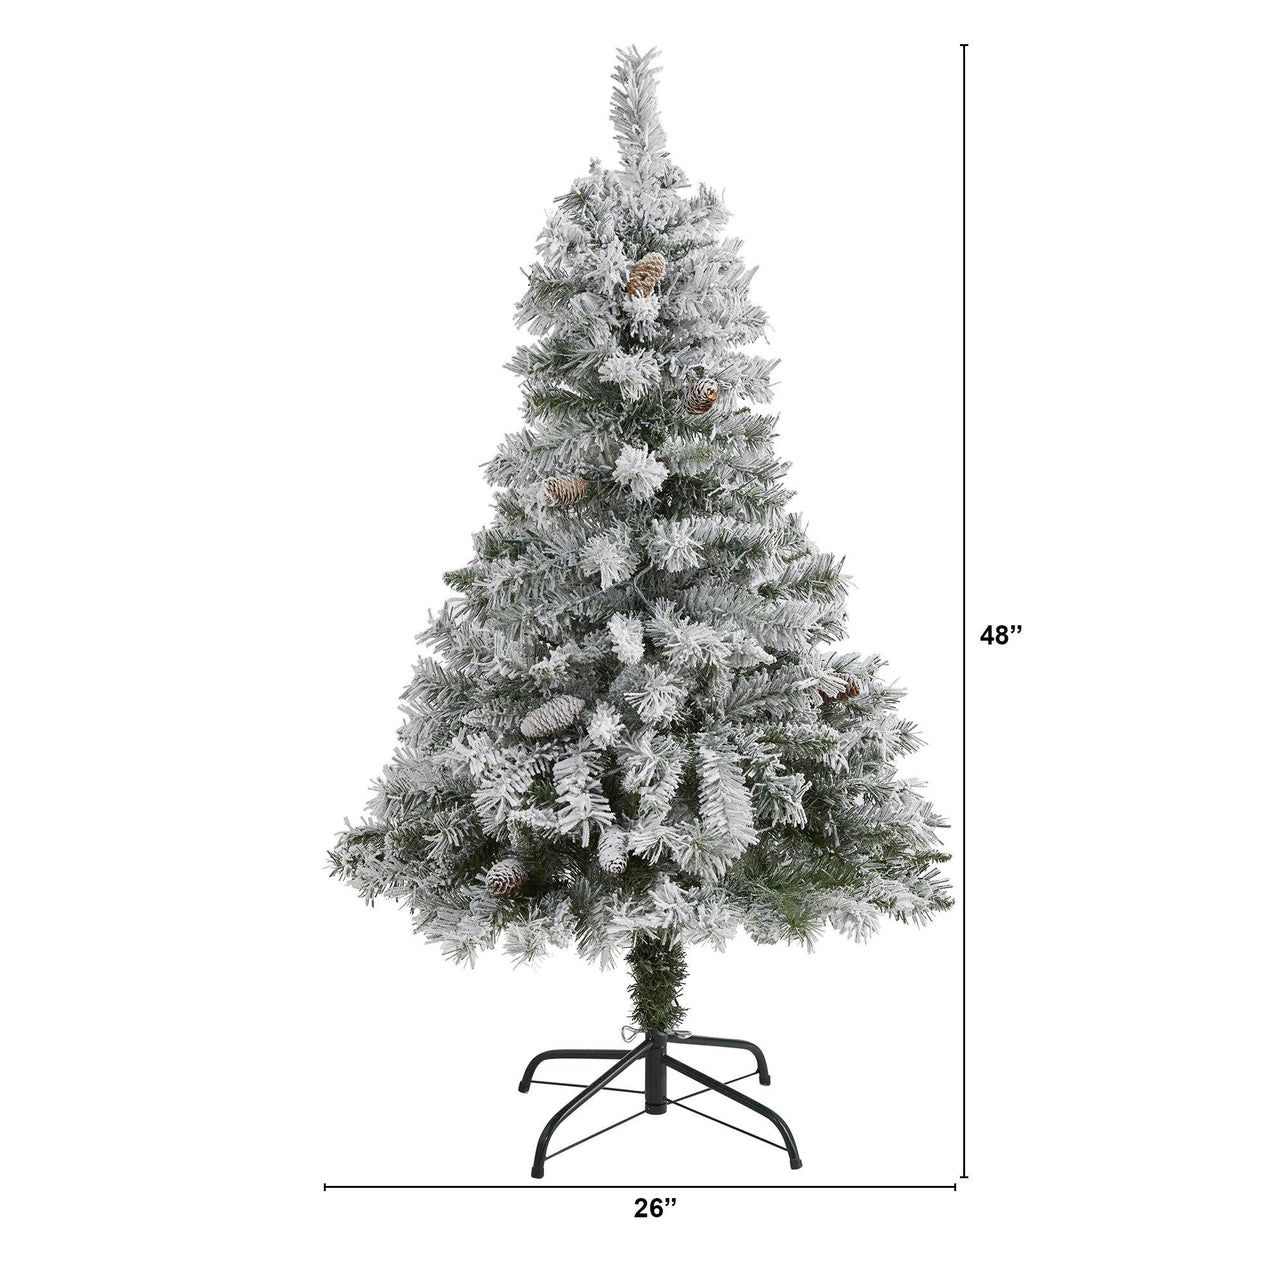 4' Flocked White River Mountain Pine Artificial Christmas Tree with Pinecones - The Fox Decor